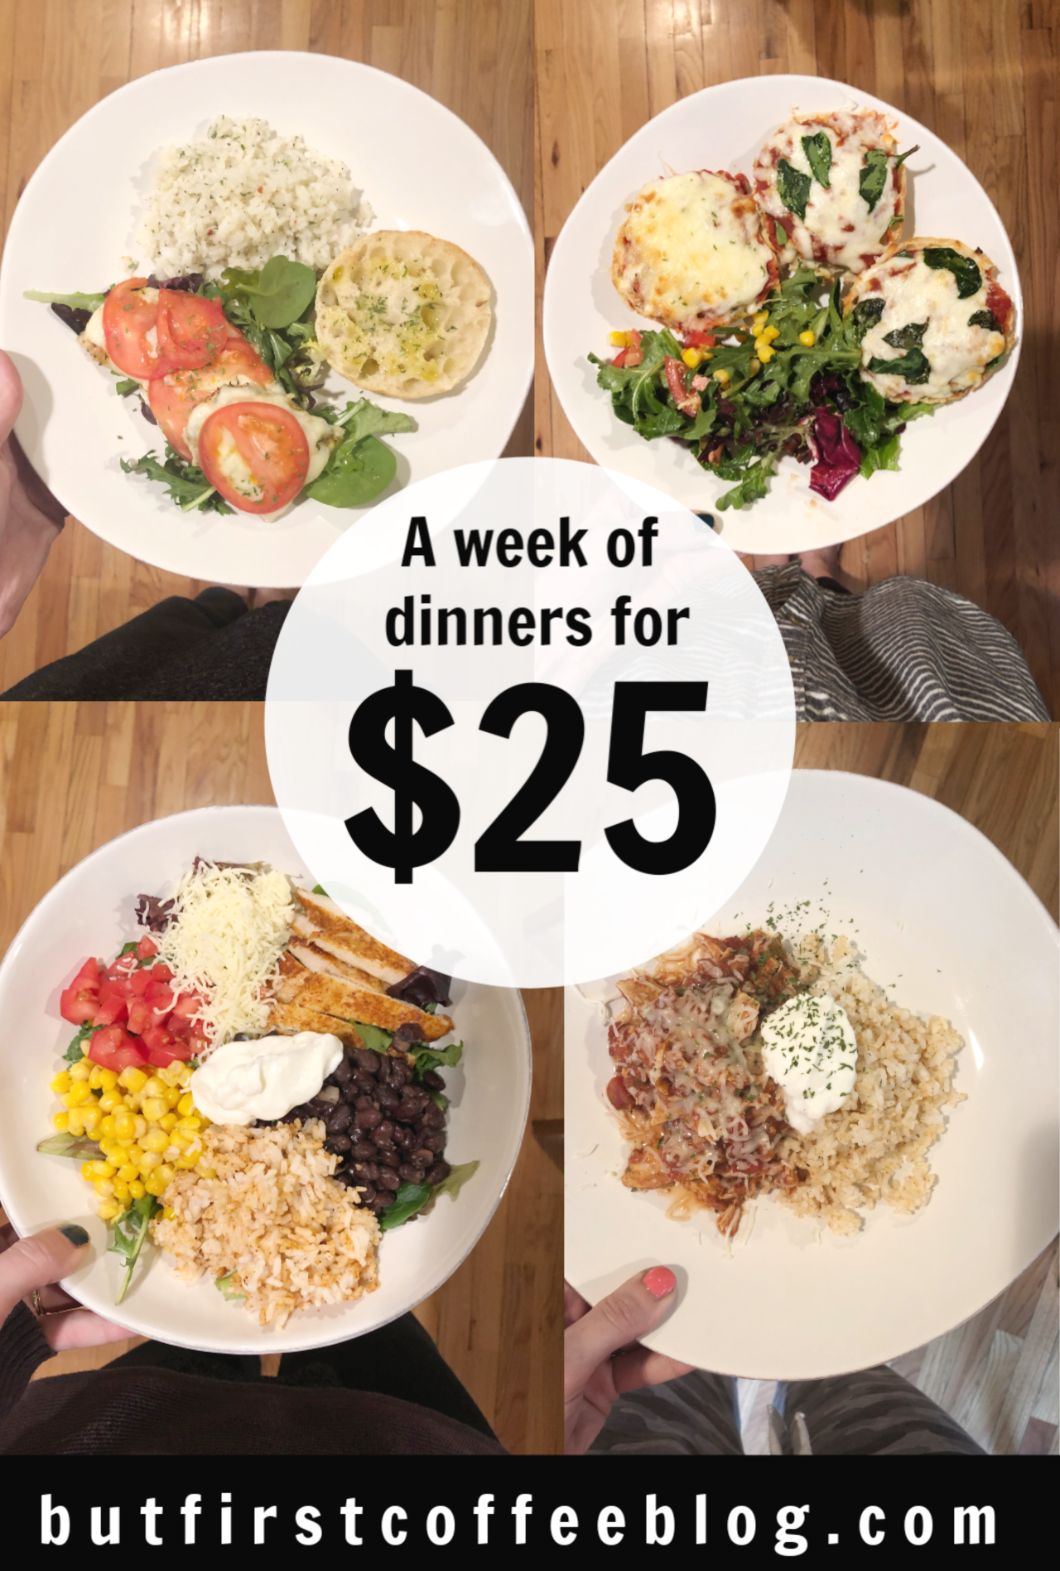 1 Week of Dinners for $25